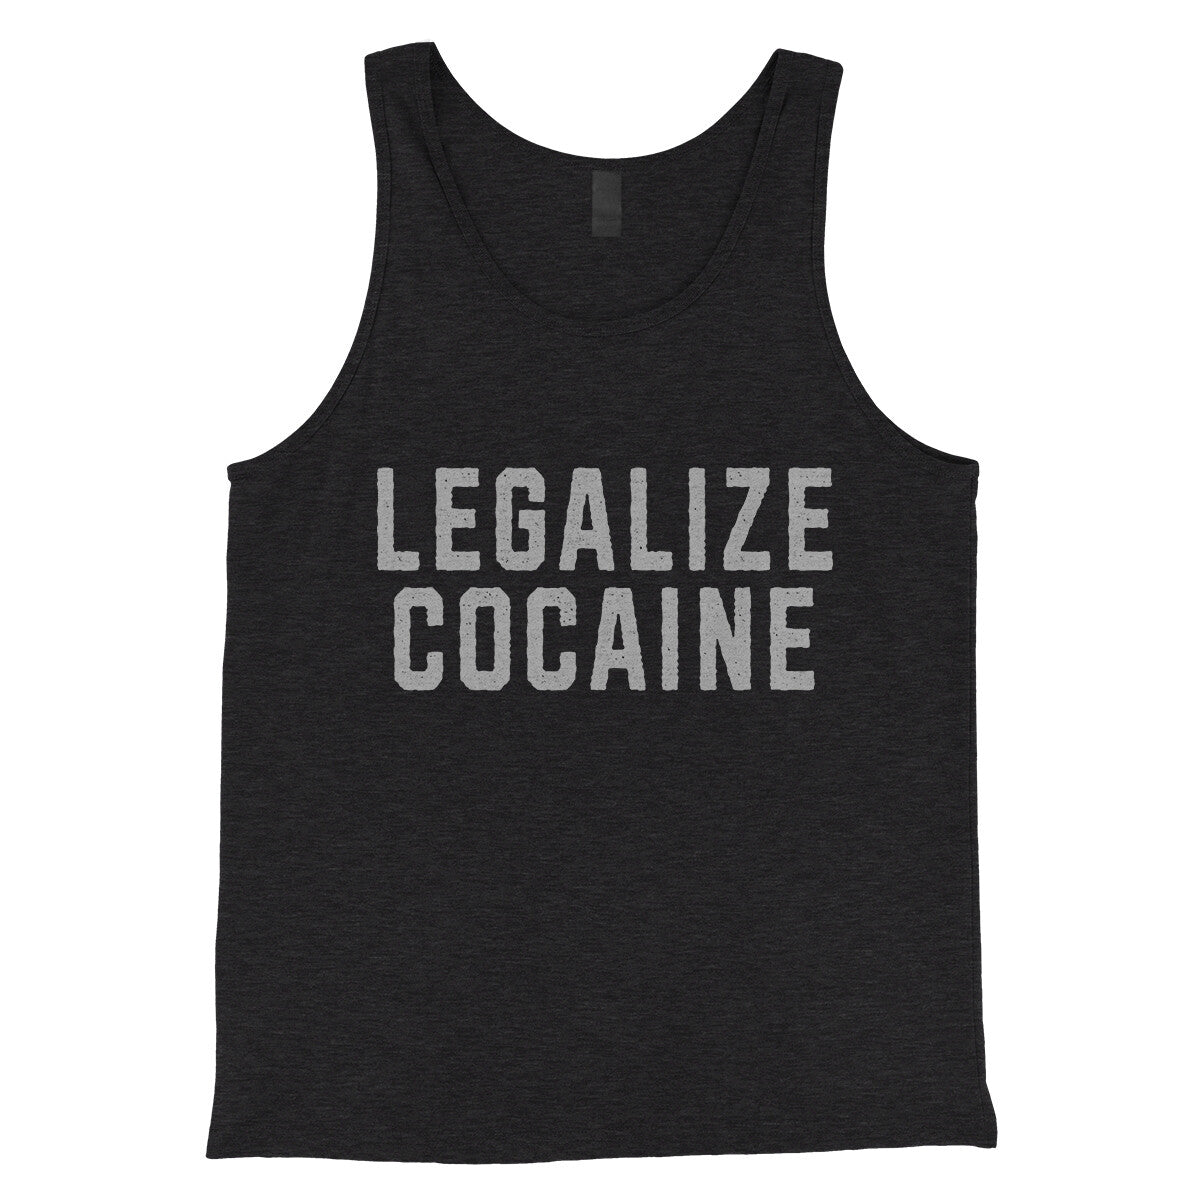 Legalize Cocaine in Charcoal Black TriBlend Color